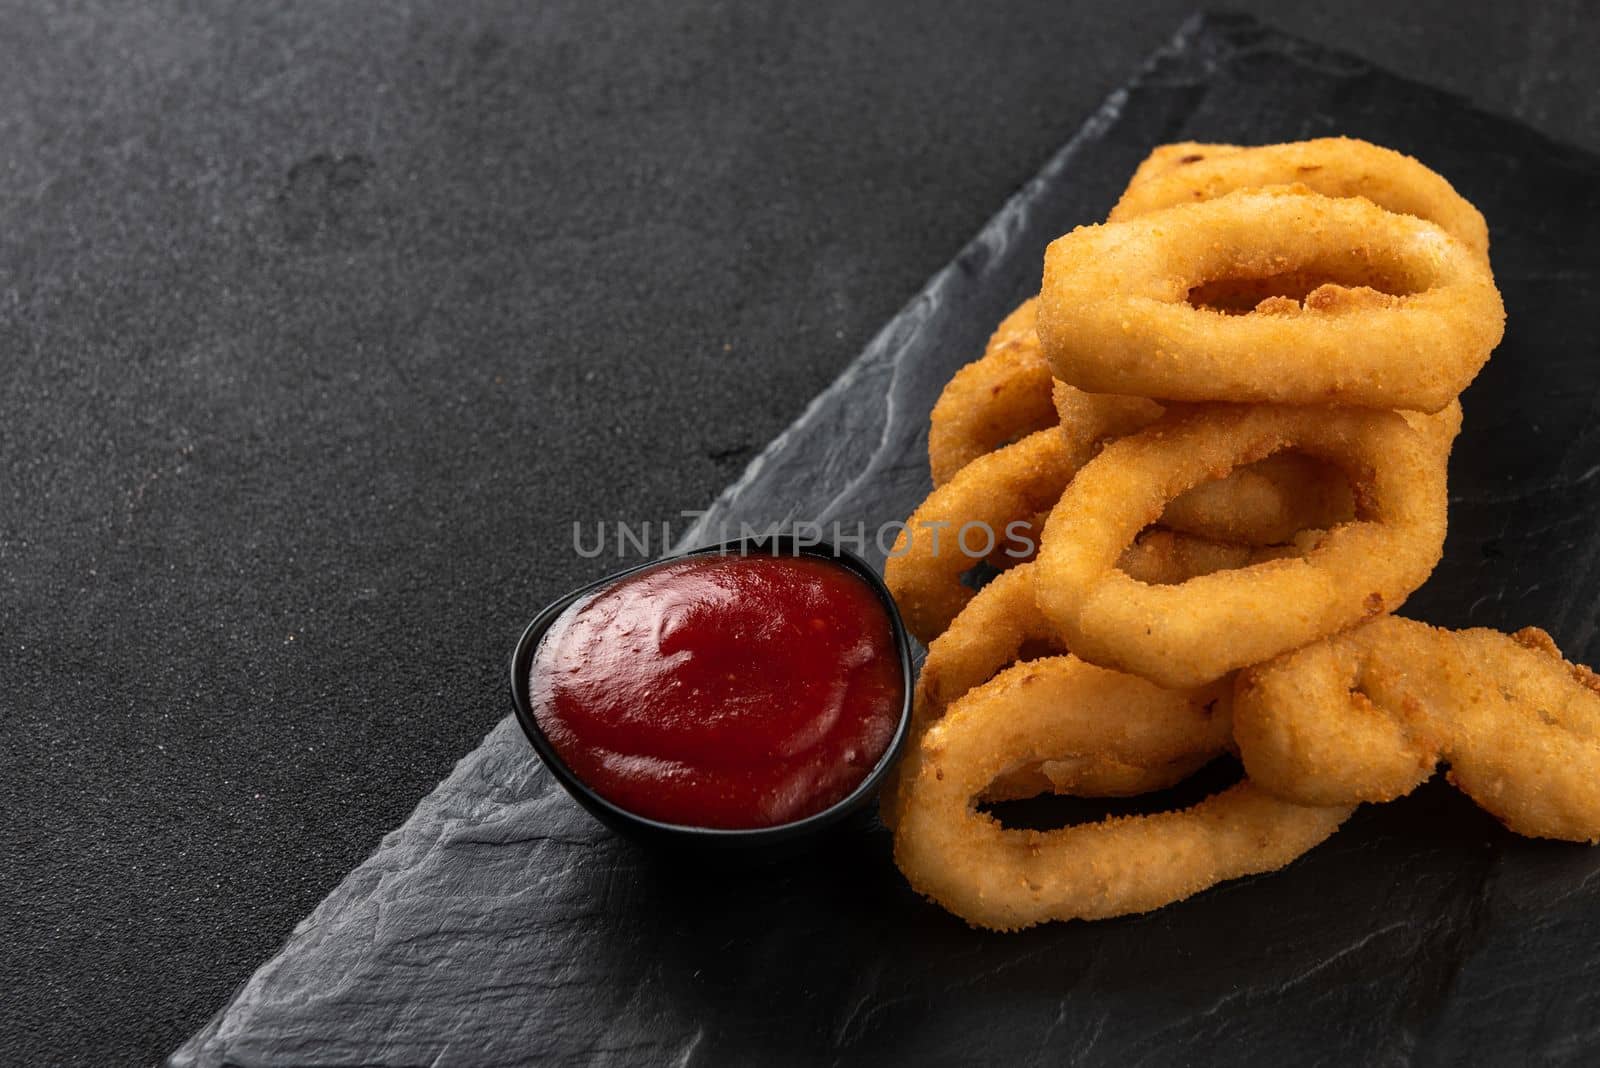 Calamari rings deep-fried in breading. Crispy squid rings on a dark background with sauce. Copy space